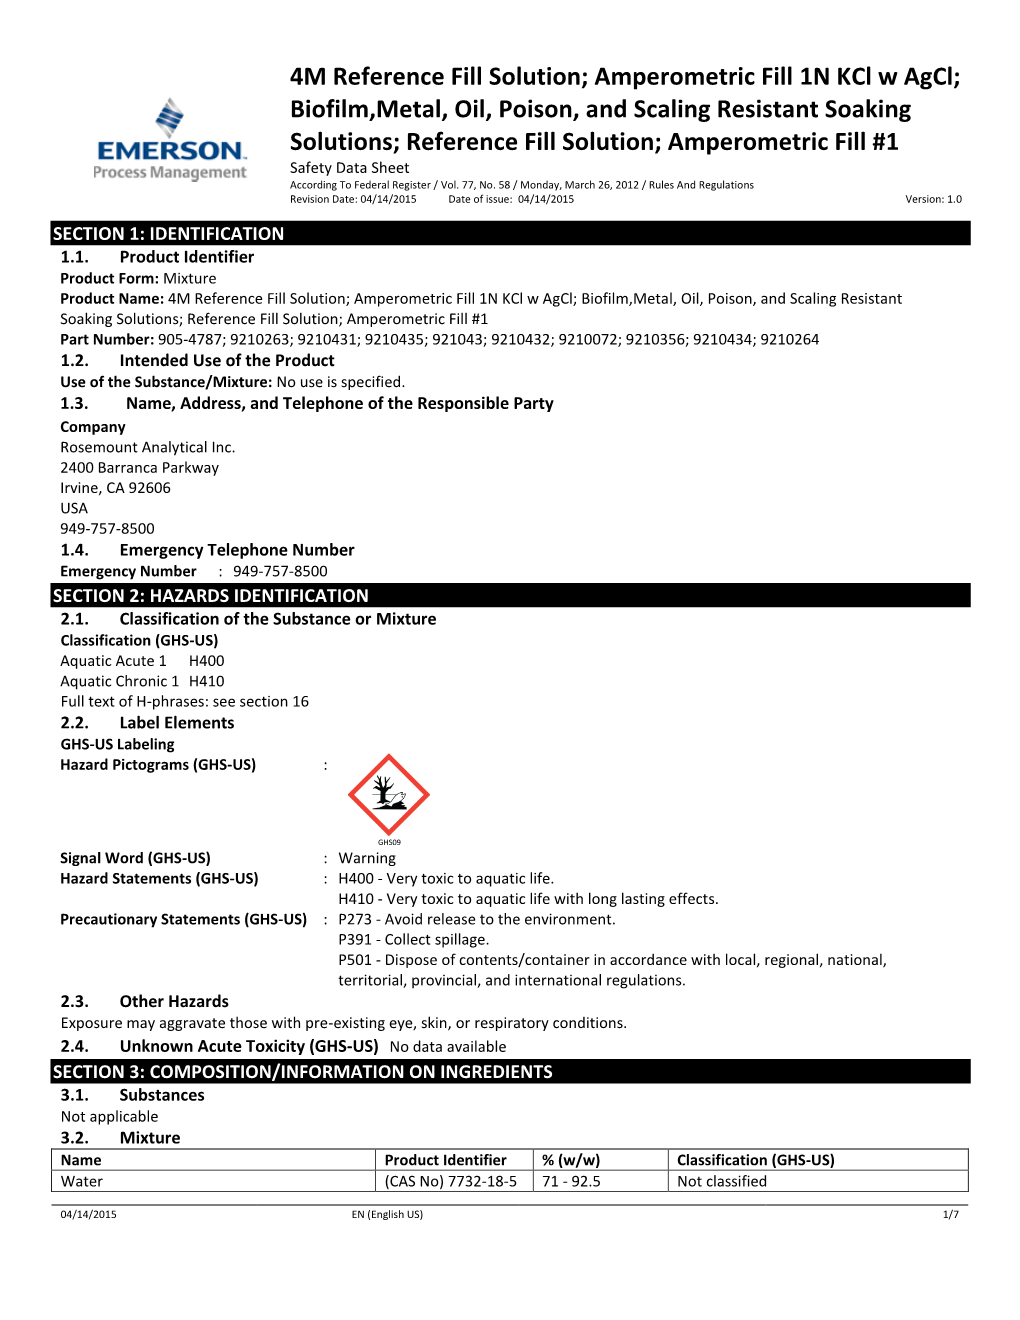 Amperometric Fill 1N Kcl W Agcl; Biofilm,Metal, Oil, Poison, and Scaling Resistant Soaking Solutions; Reference Fill Solution; Amperometric Fill #1 Safety Data Sheet